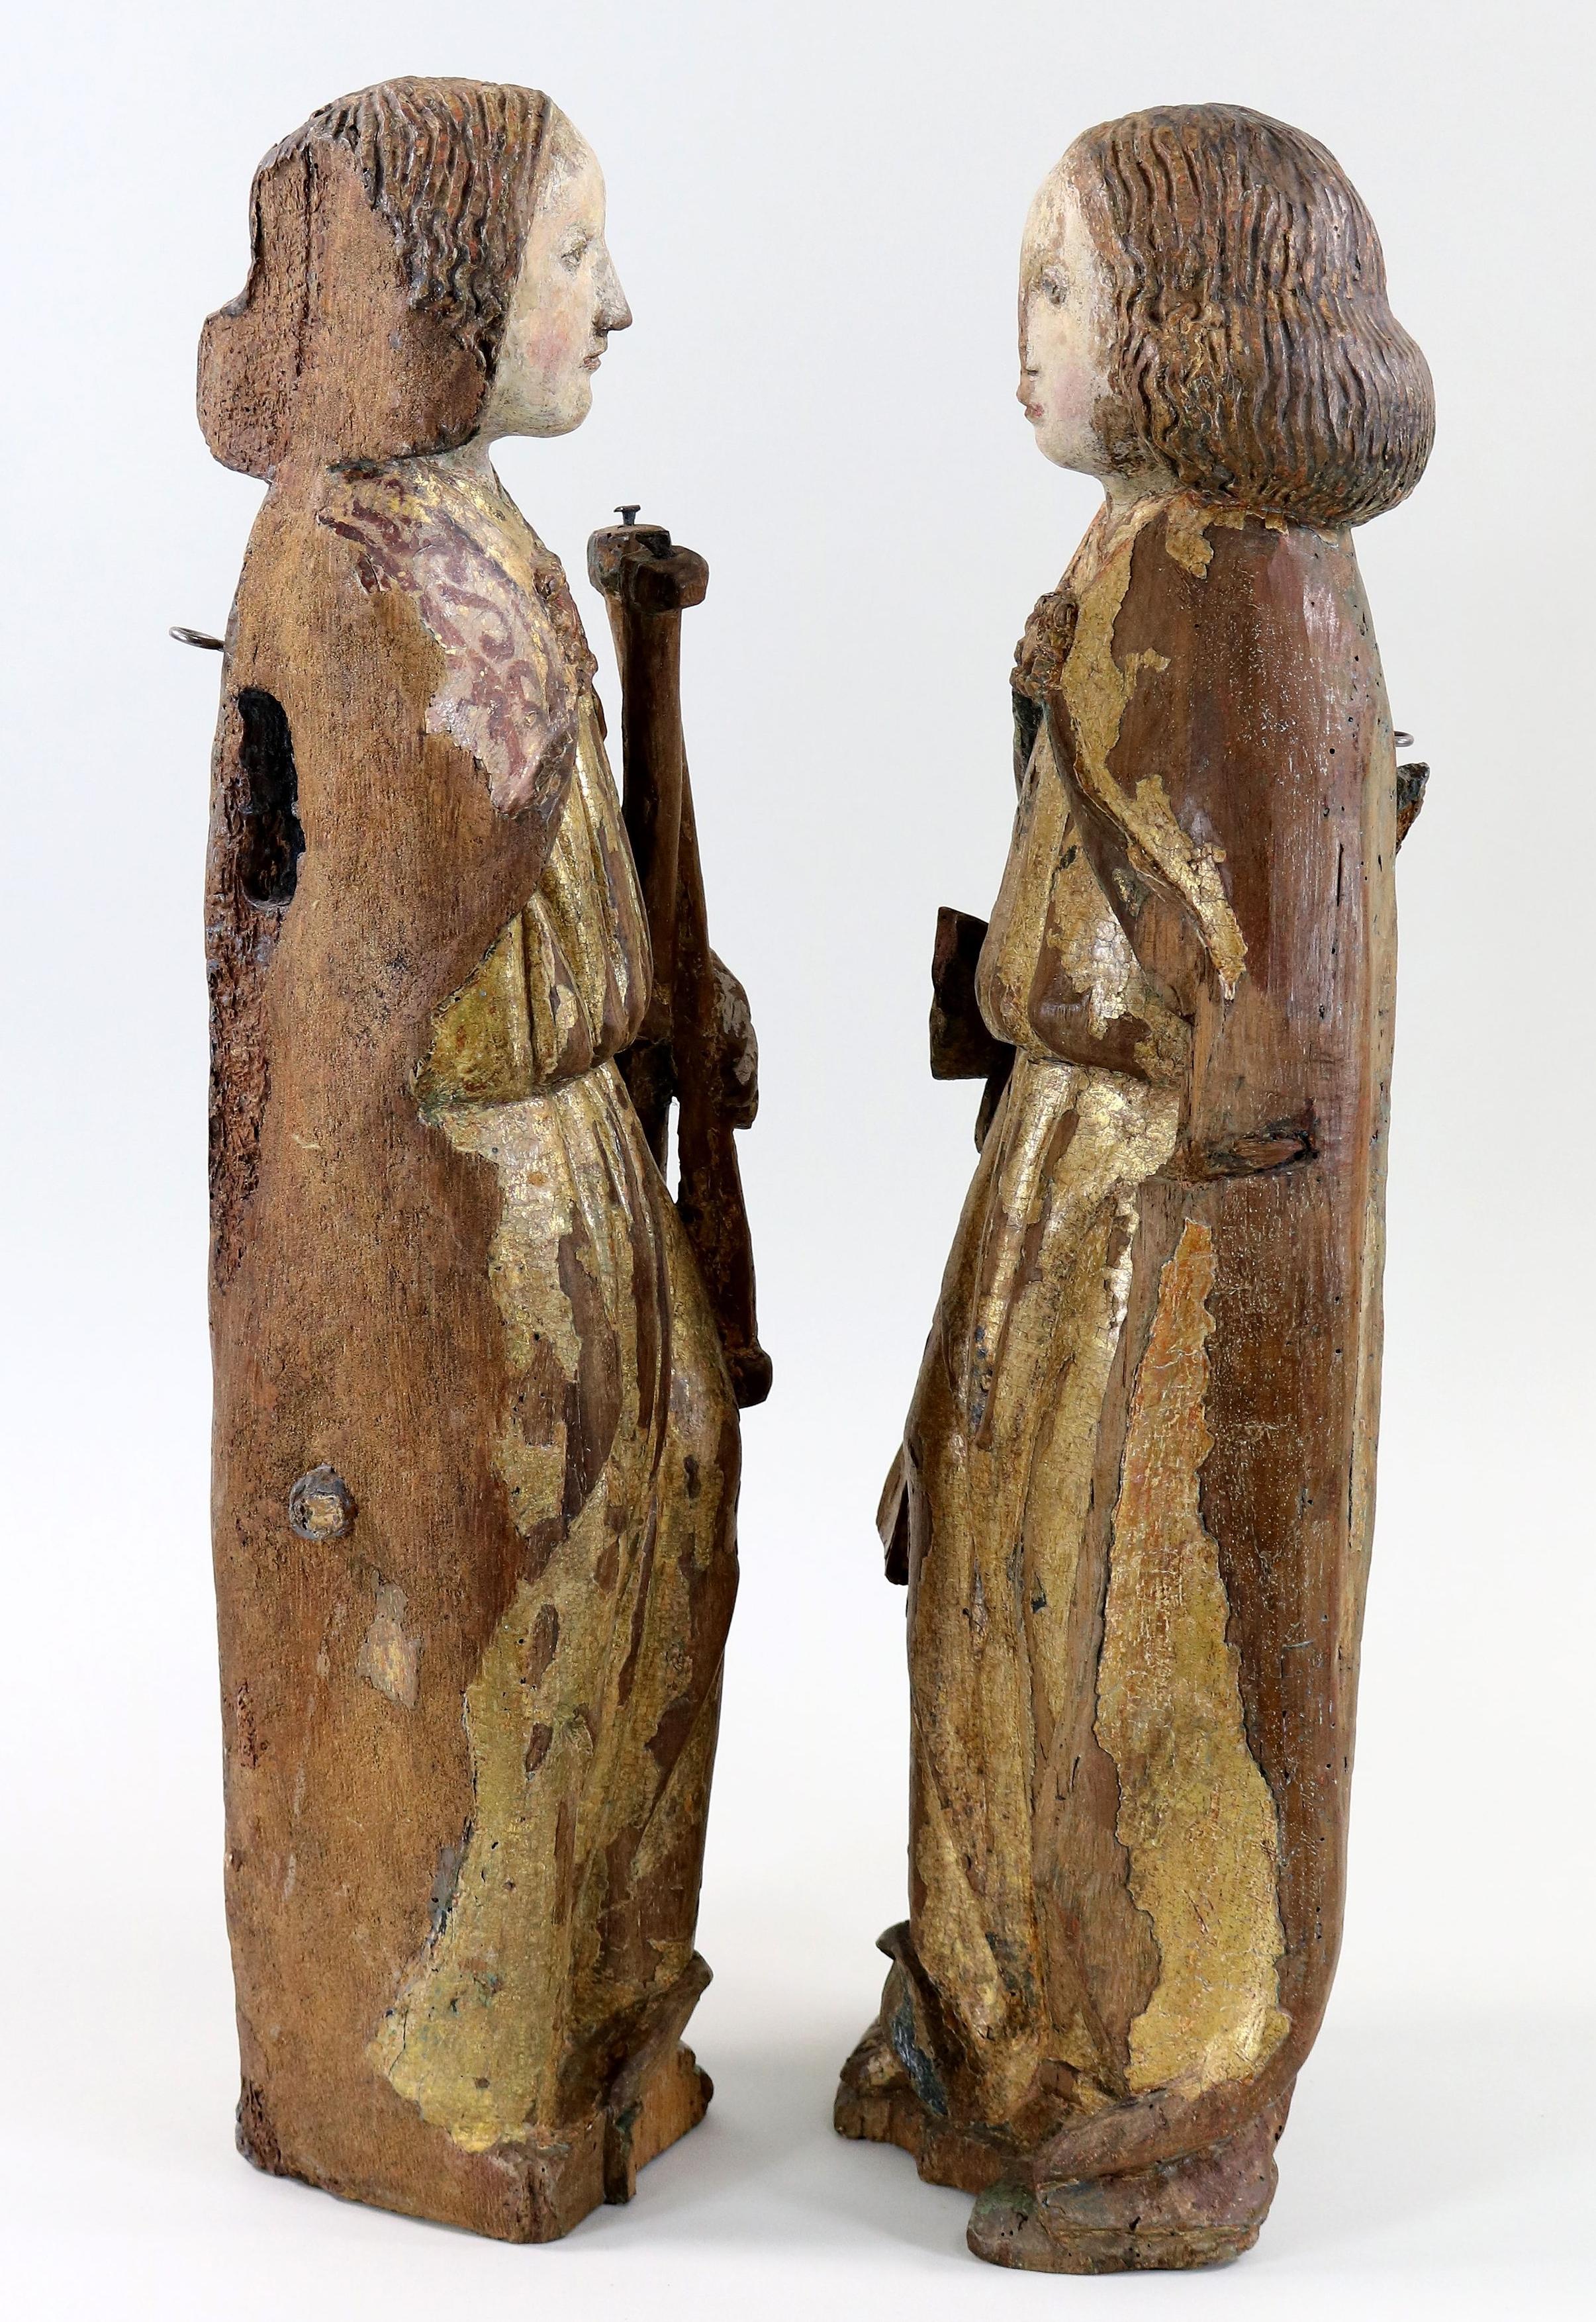 Pair of gilt and polychrome wood angels around 1500

These angels belonged to a gallery of angels carrying the instruments of the Passion, of which only one of our angels preserves the attributes.

Important remains of the original gilding, enhanced